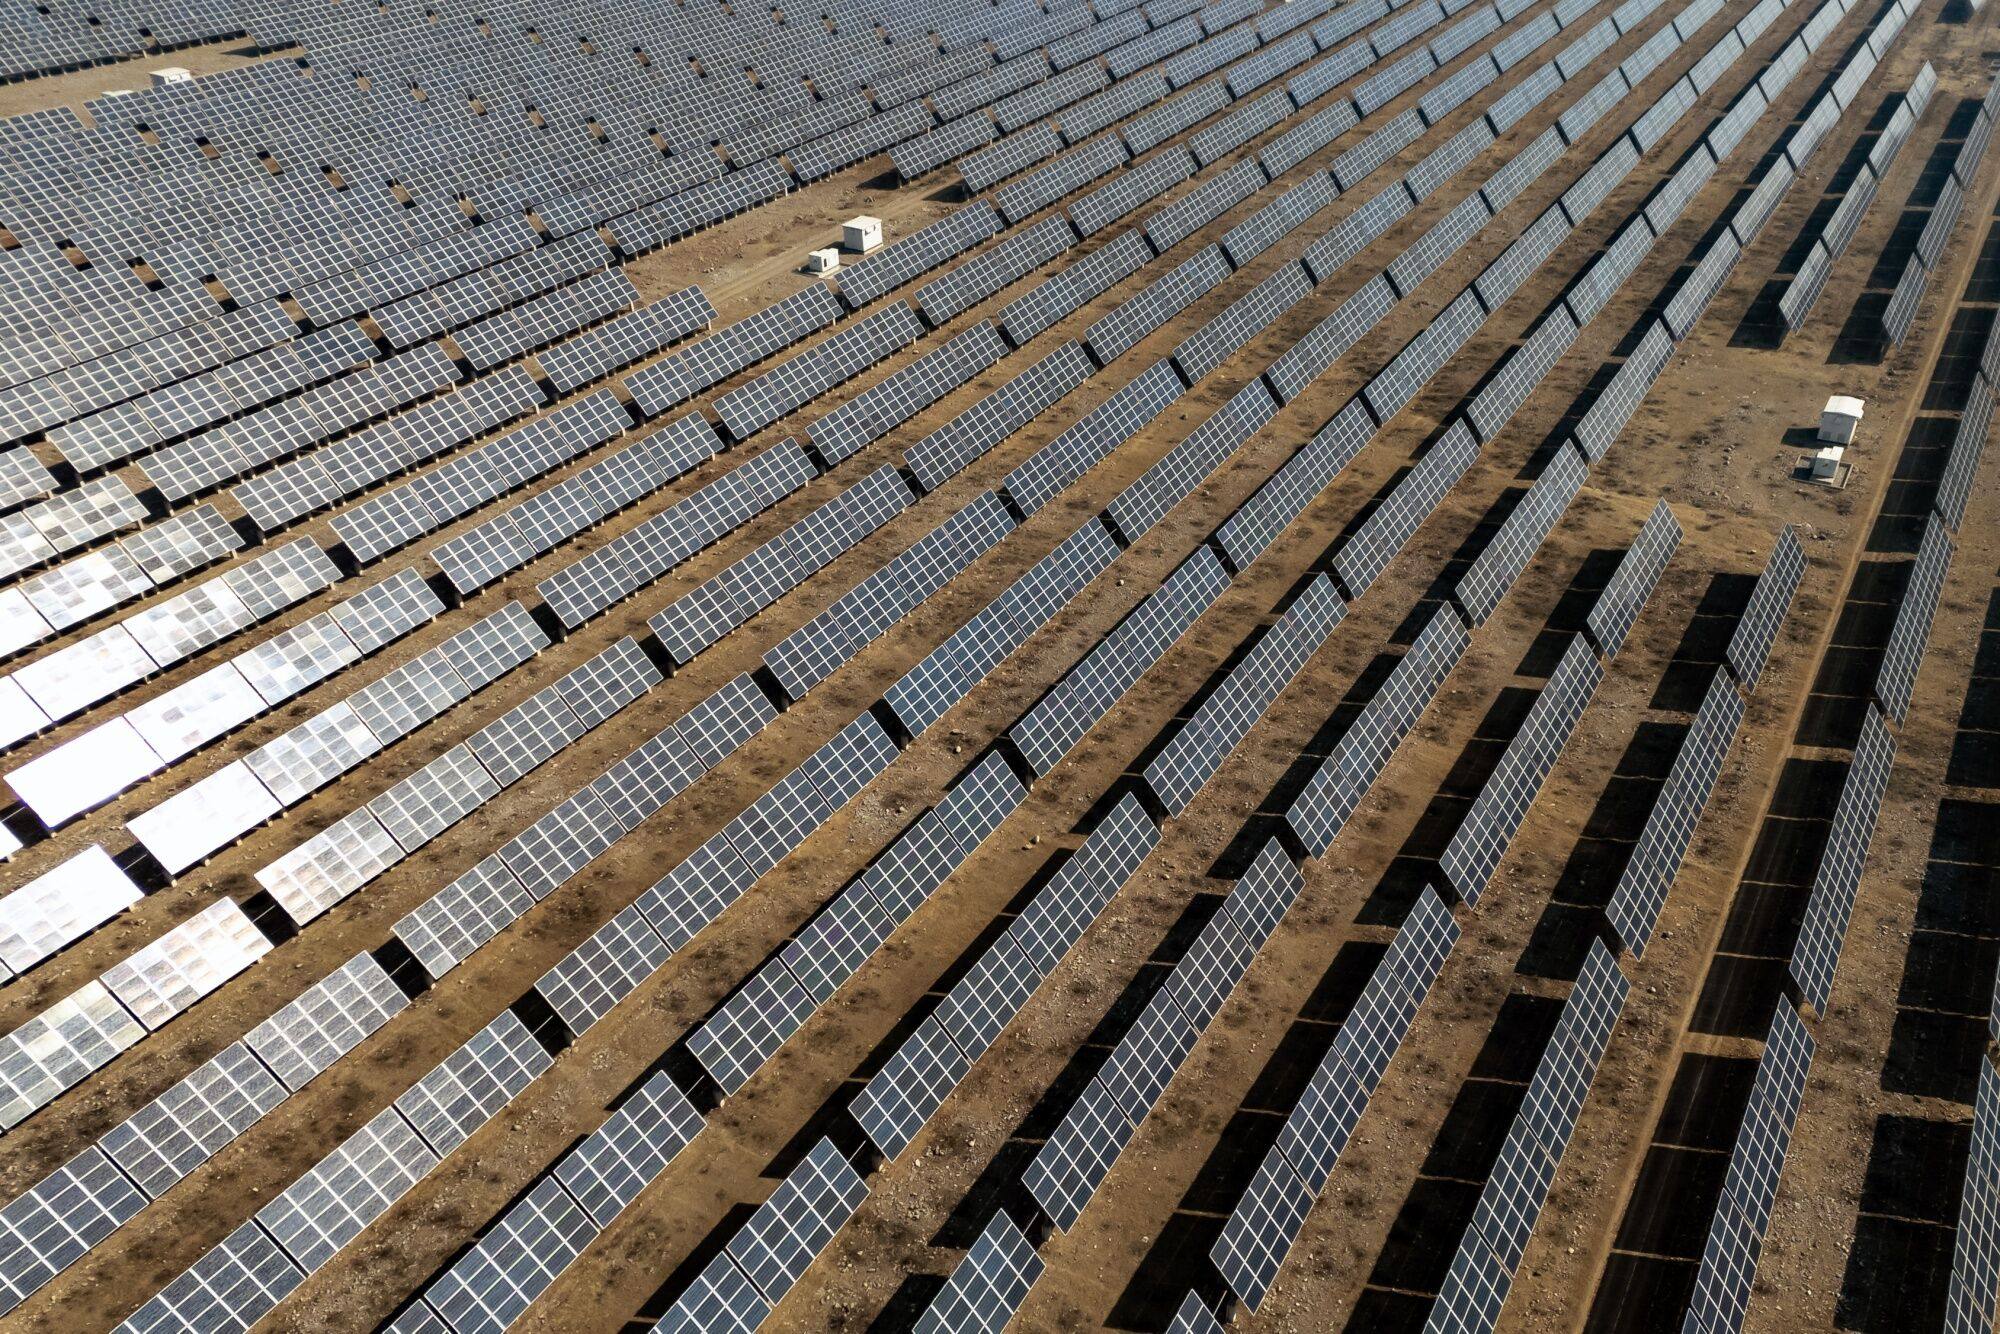 The nanosheets have potential uses in an “extremely long” list of industries, including solar power, according to the scientists. Photo: Bloomberg